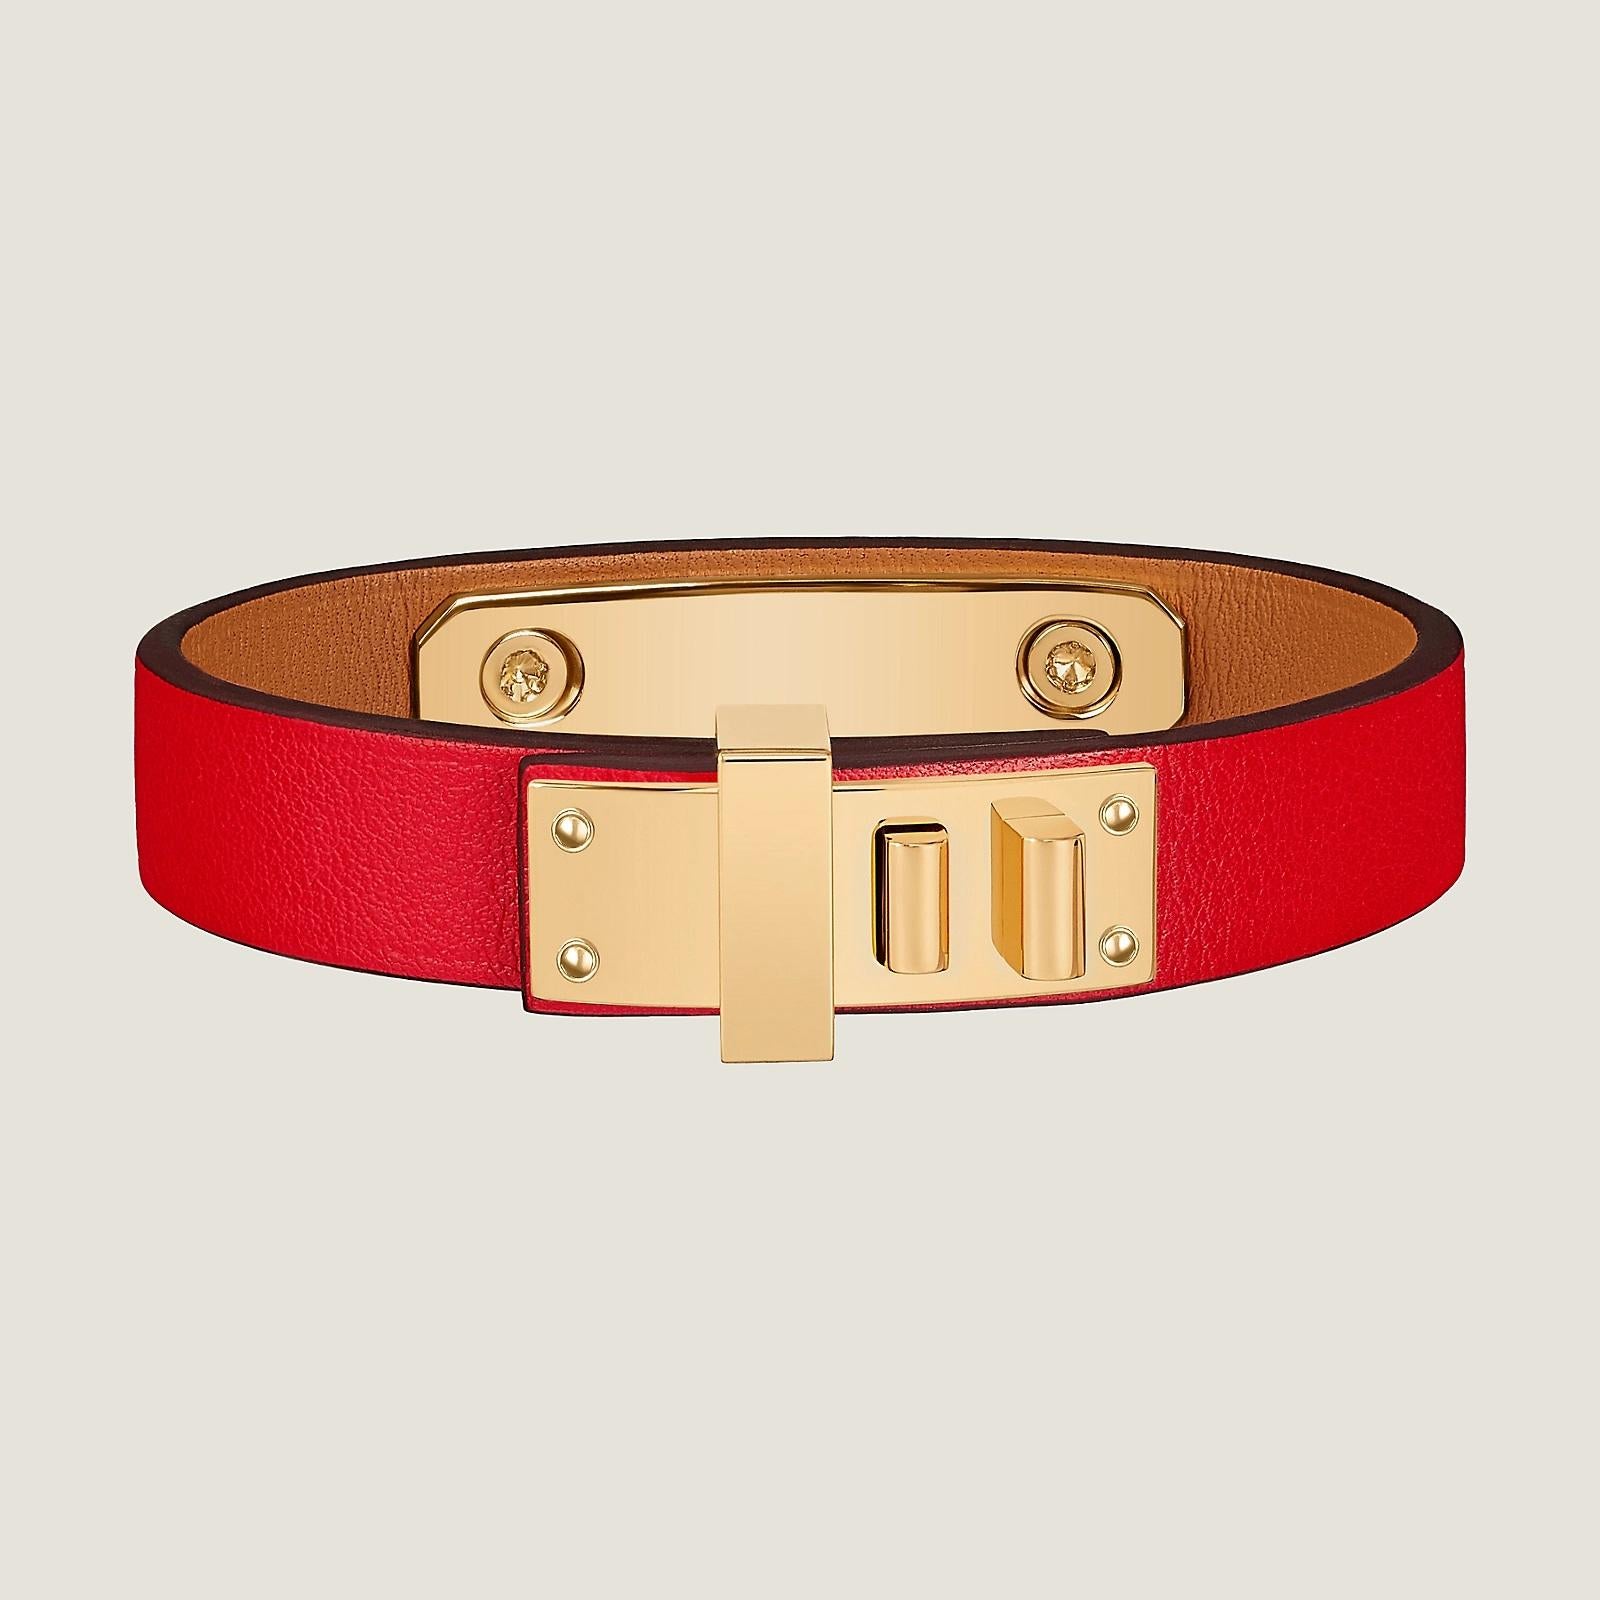 Color: Heart Red Size T2 15.5cm
Fine bracelet in Swift calfskin. Gold plated finish.
The result of leatherwork and goldsmithing know-how, this elegant metal plate is openworked with a heart framed by two iconic Médor studs.
14.5cm to 15.5cm wrist